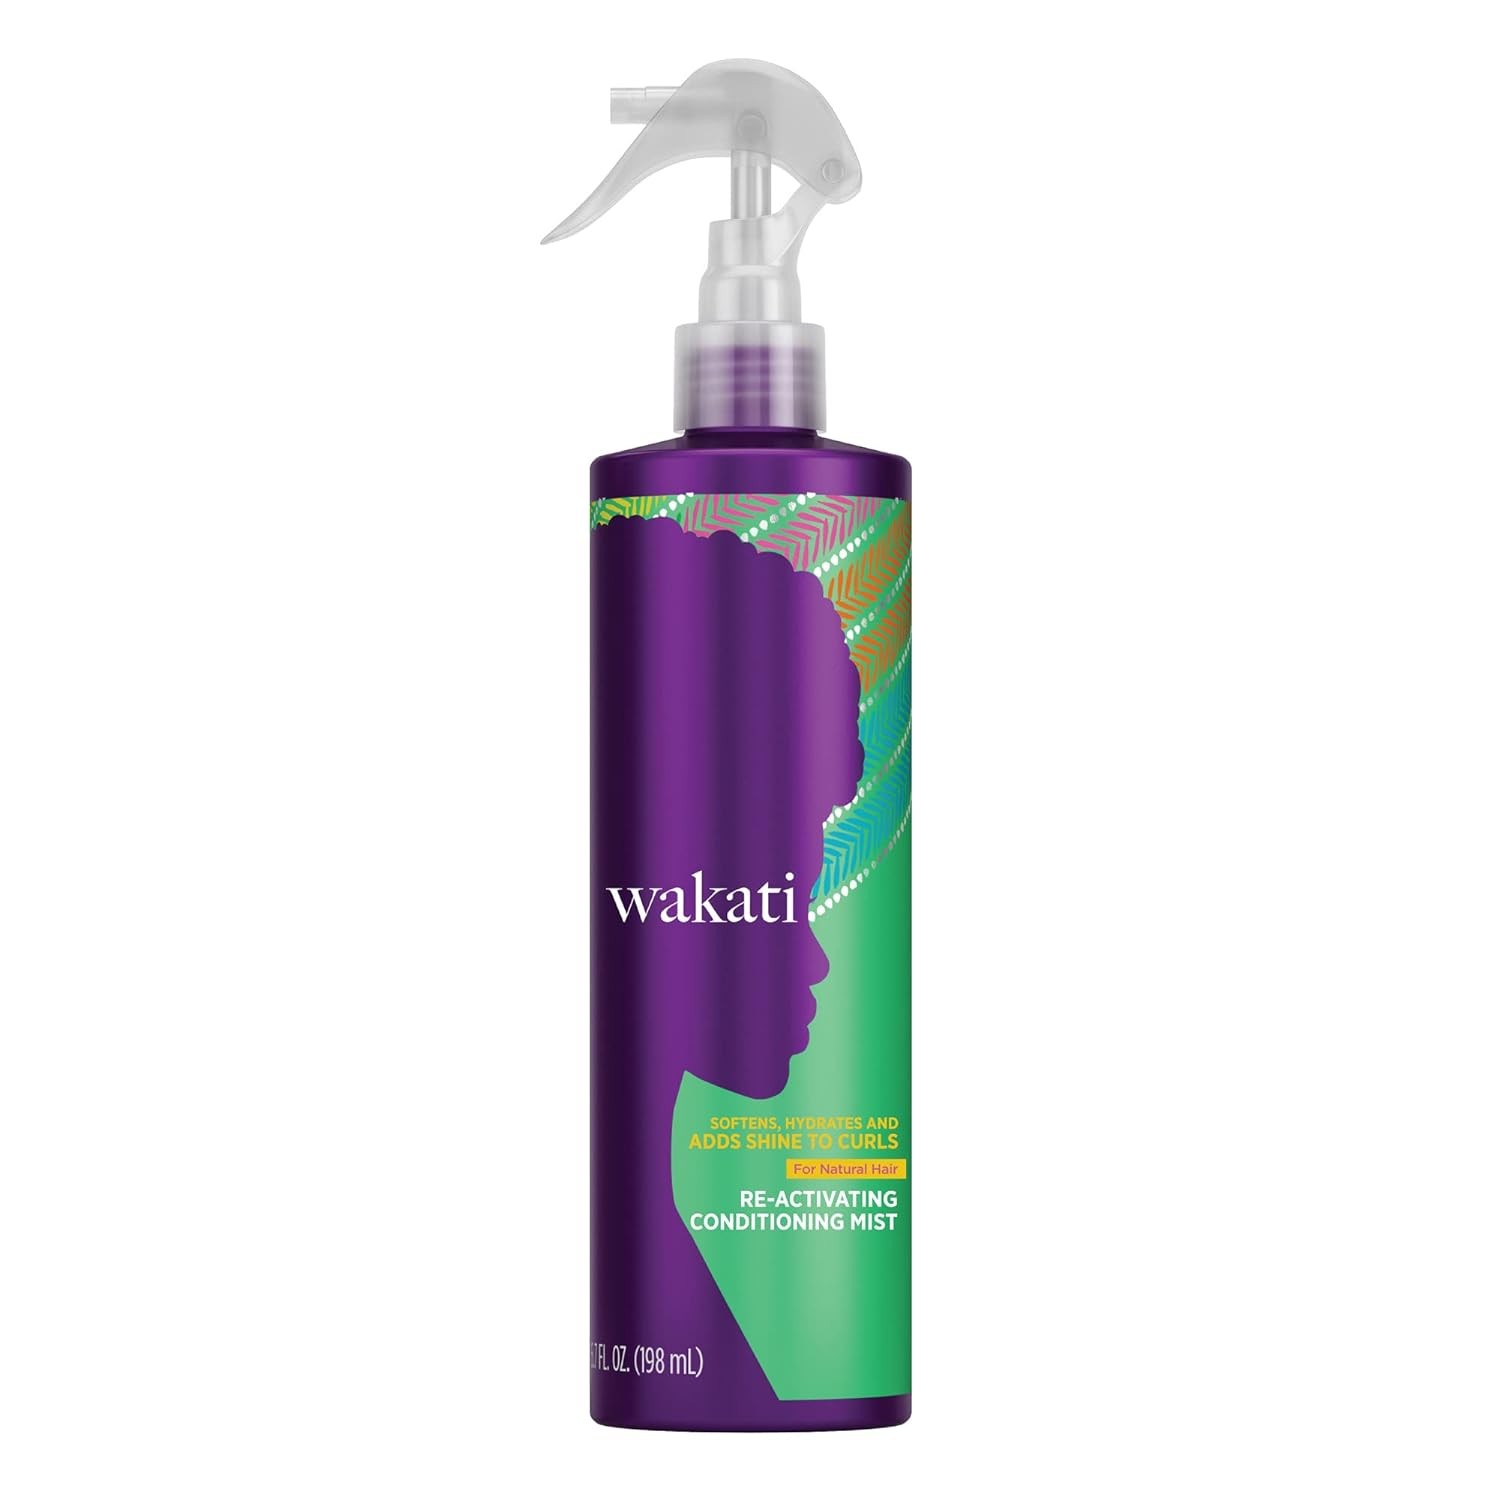 Wakati Conditioning Mist Re-Activating 6.7oz